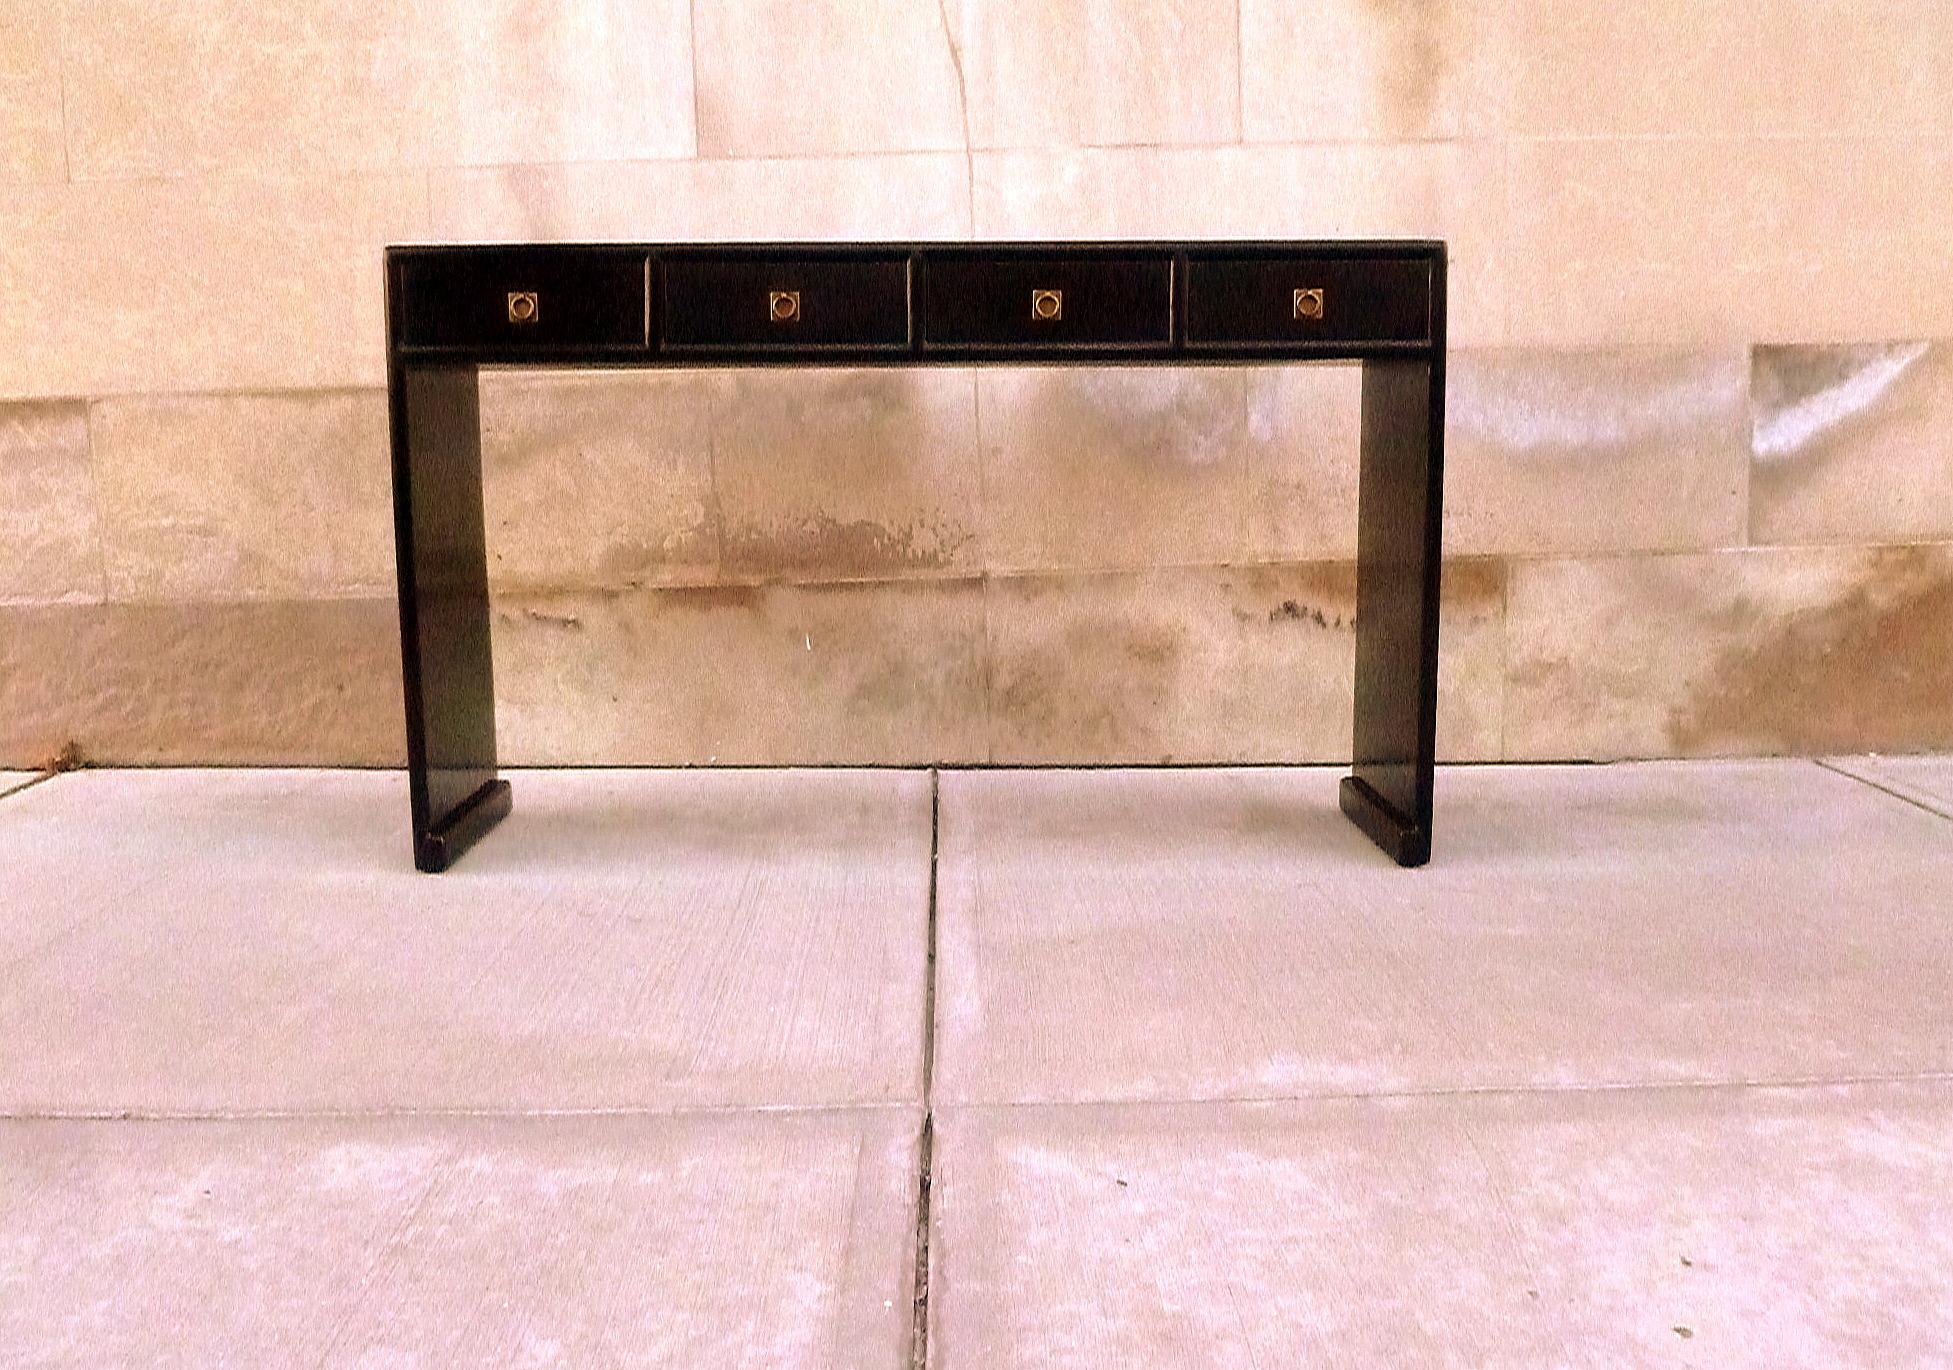 Fine black lacquer console table with four drawers, waterfall legs, brass fitting, elegant and simple form, beautiful lines. We carry fine quality furniture with elegant finished and has been appeared many times in 